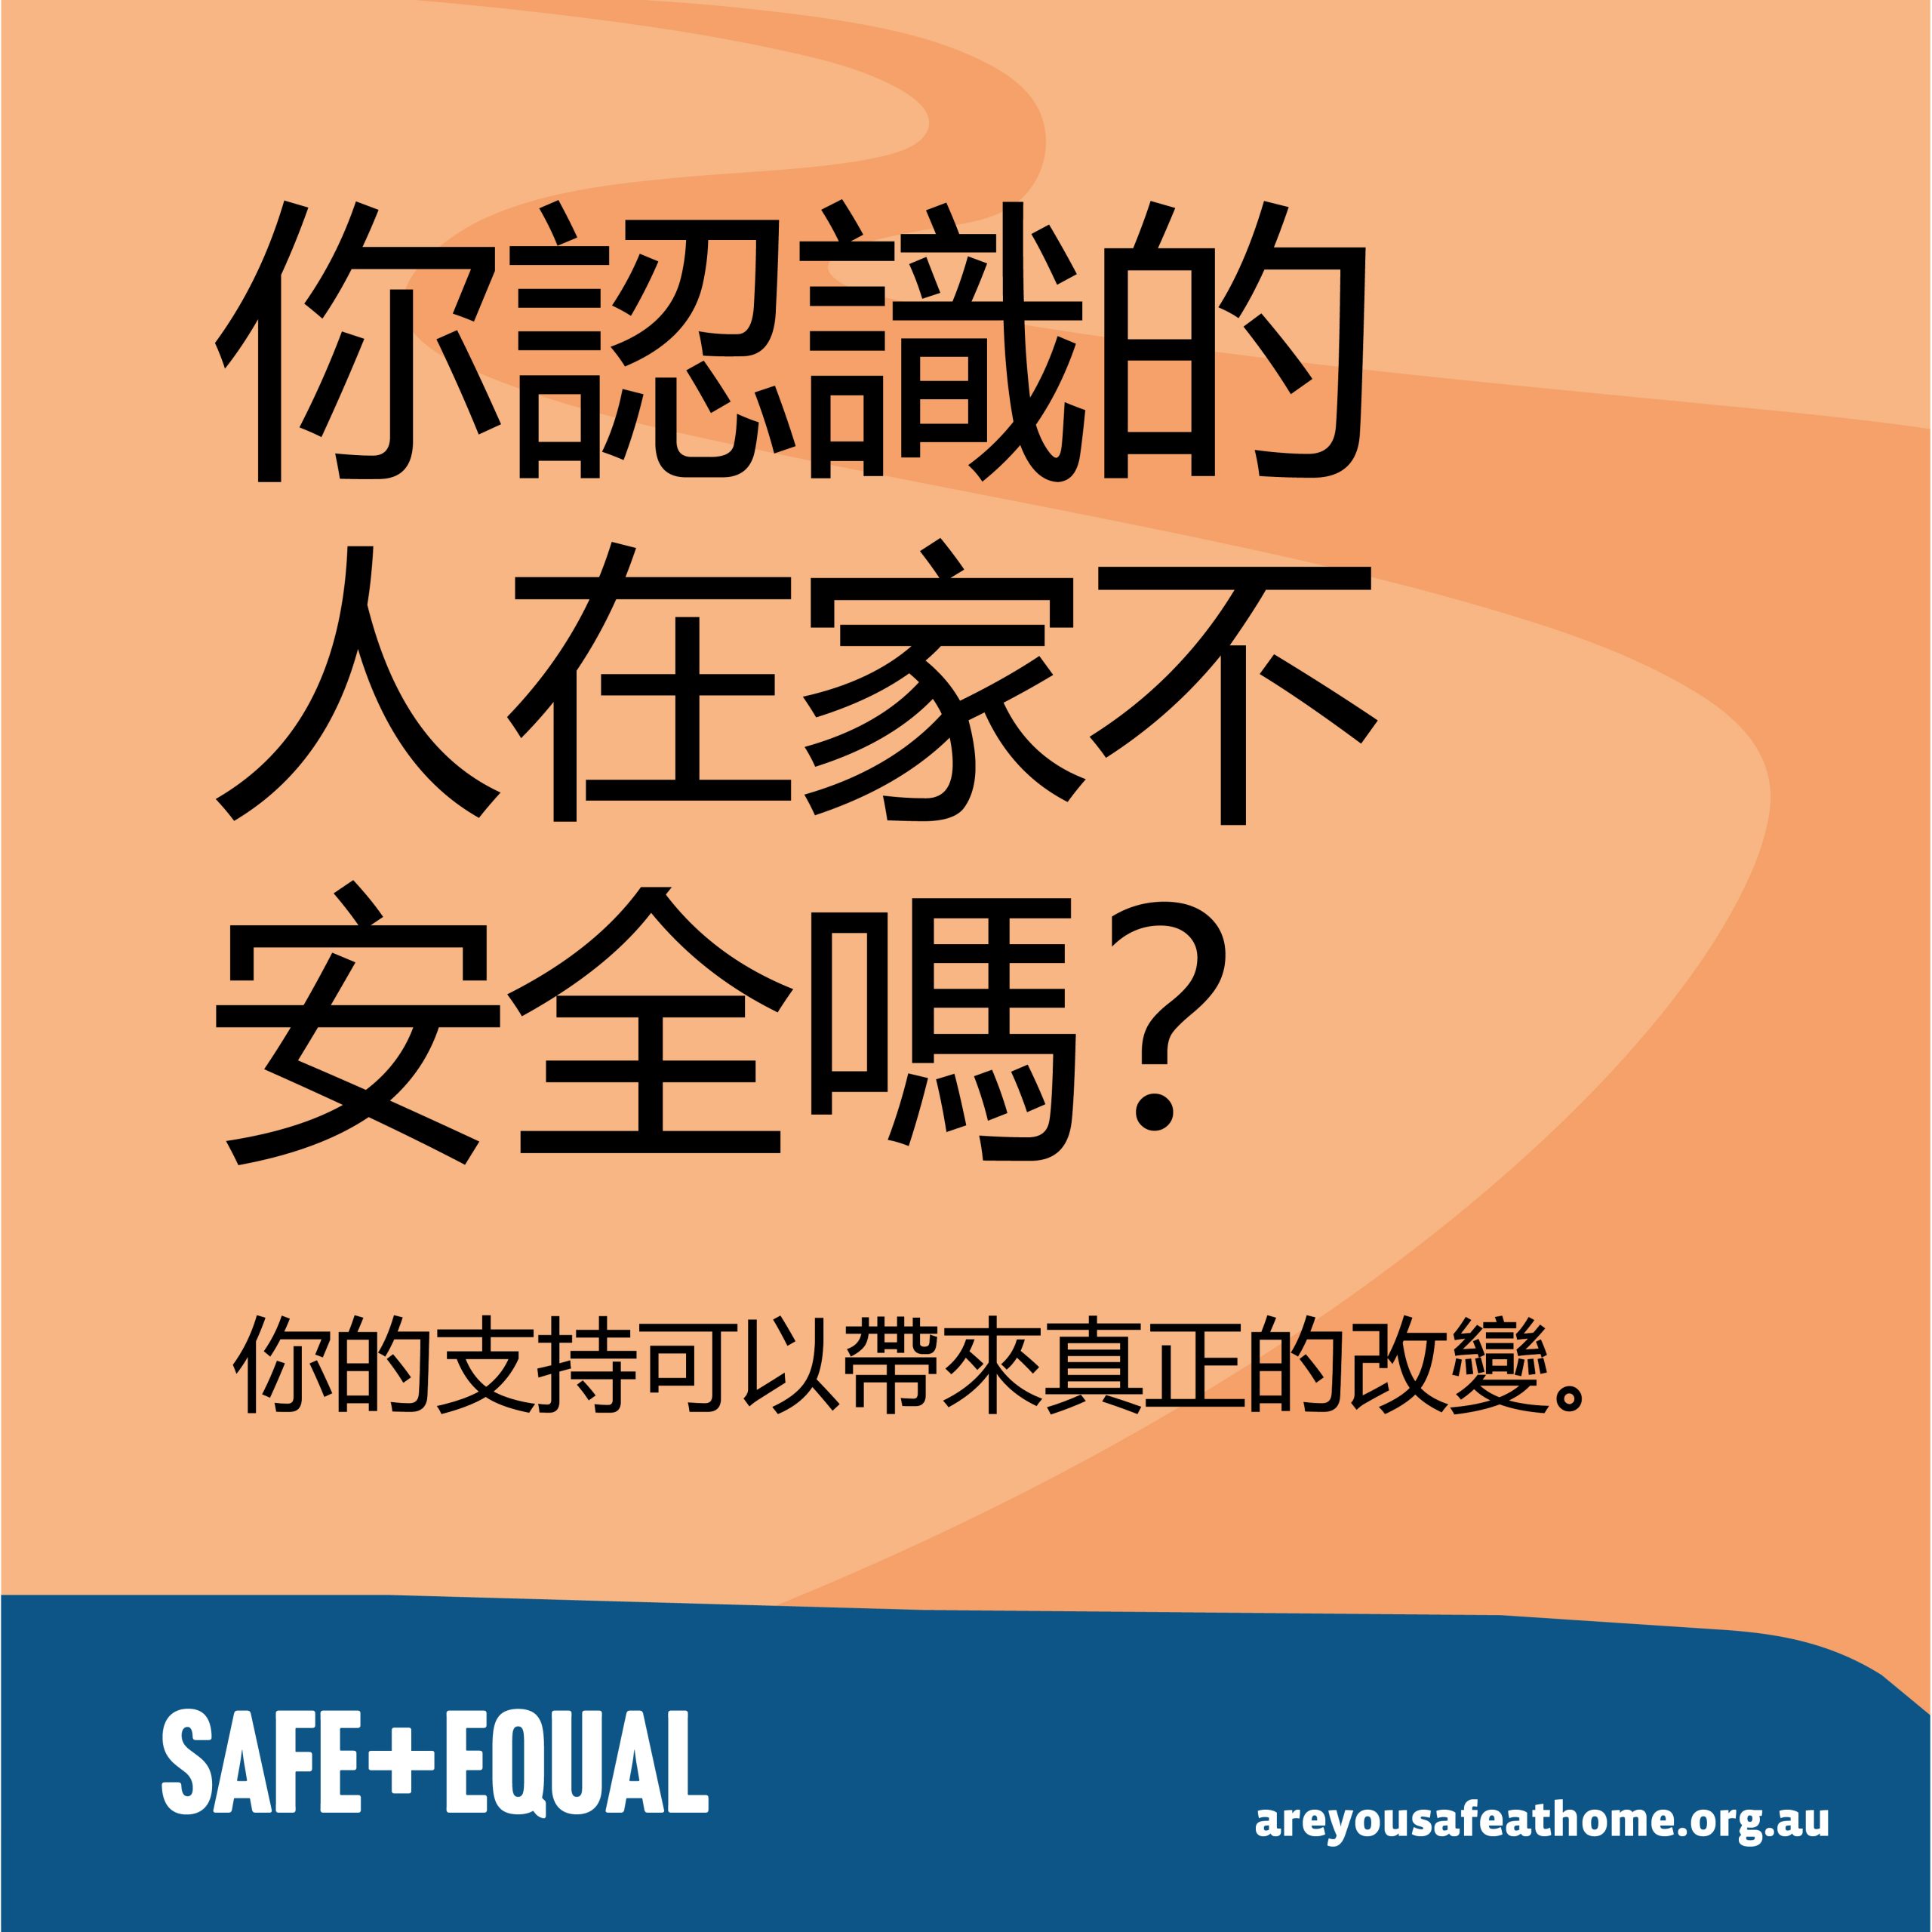 Social media tile for Are you safe at home translated into Traditional Chinese